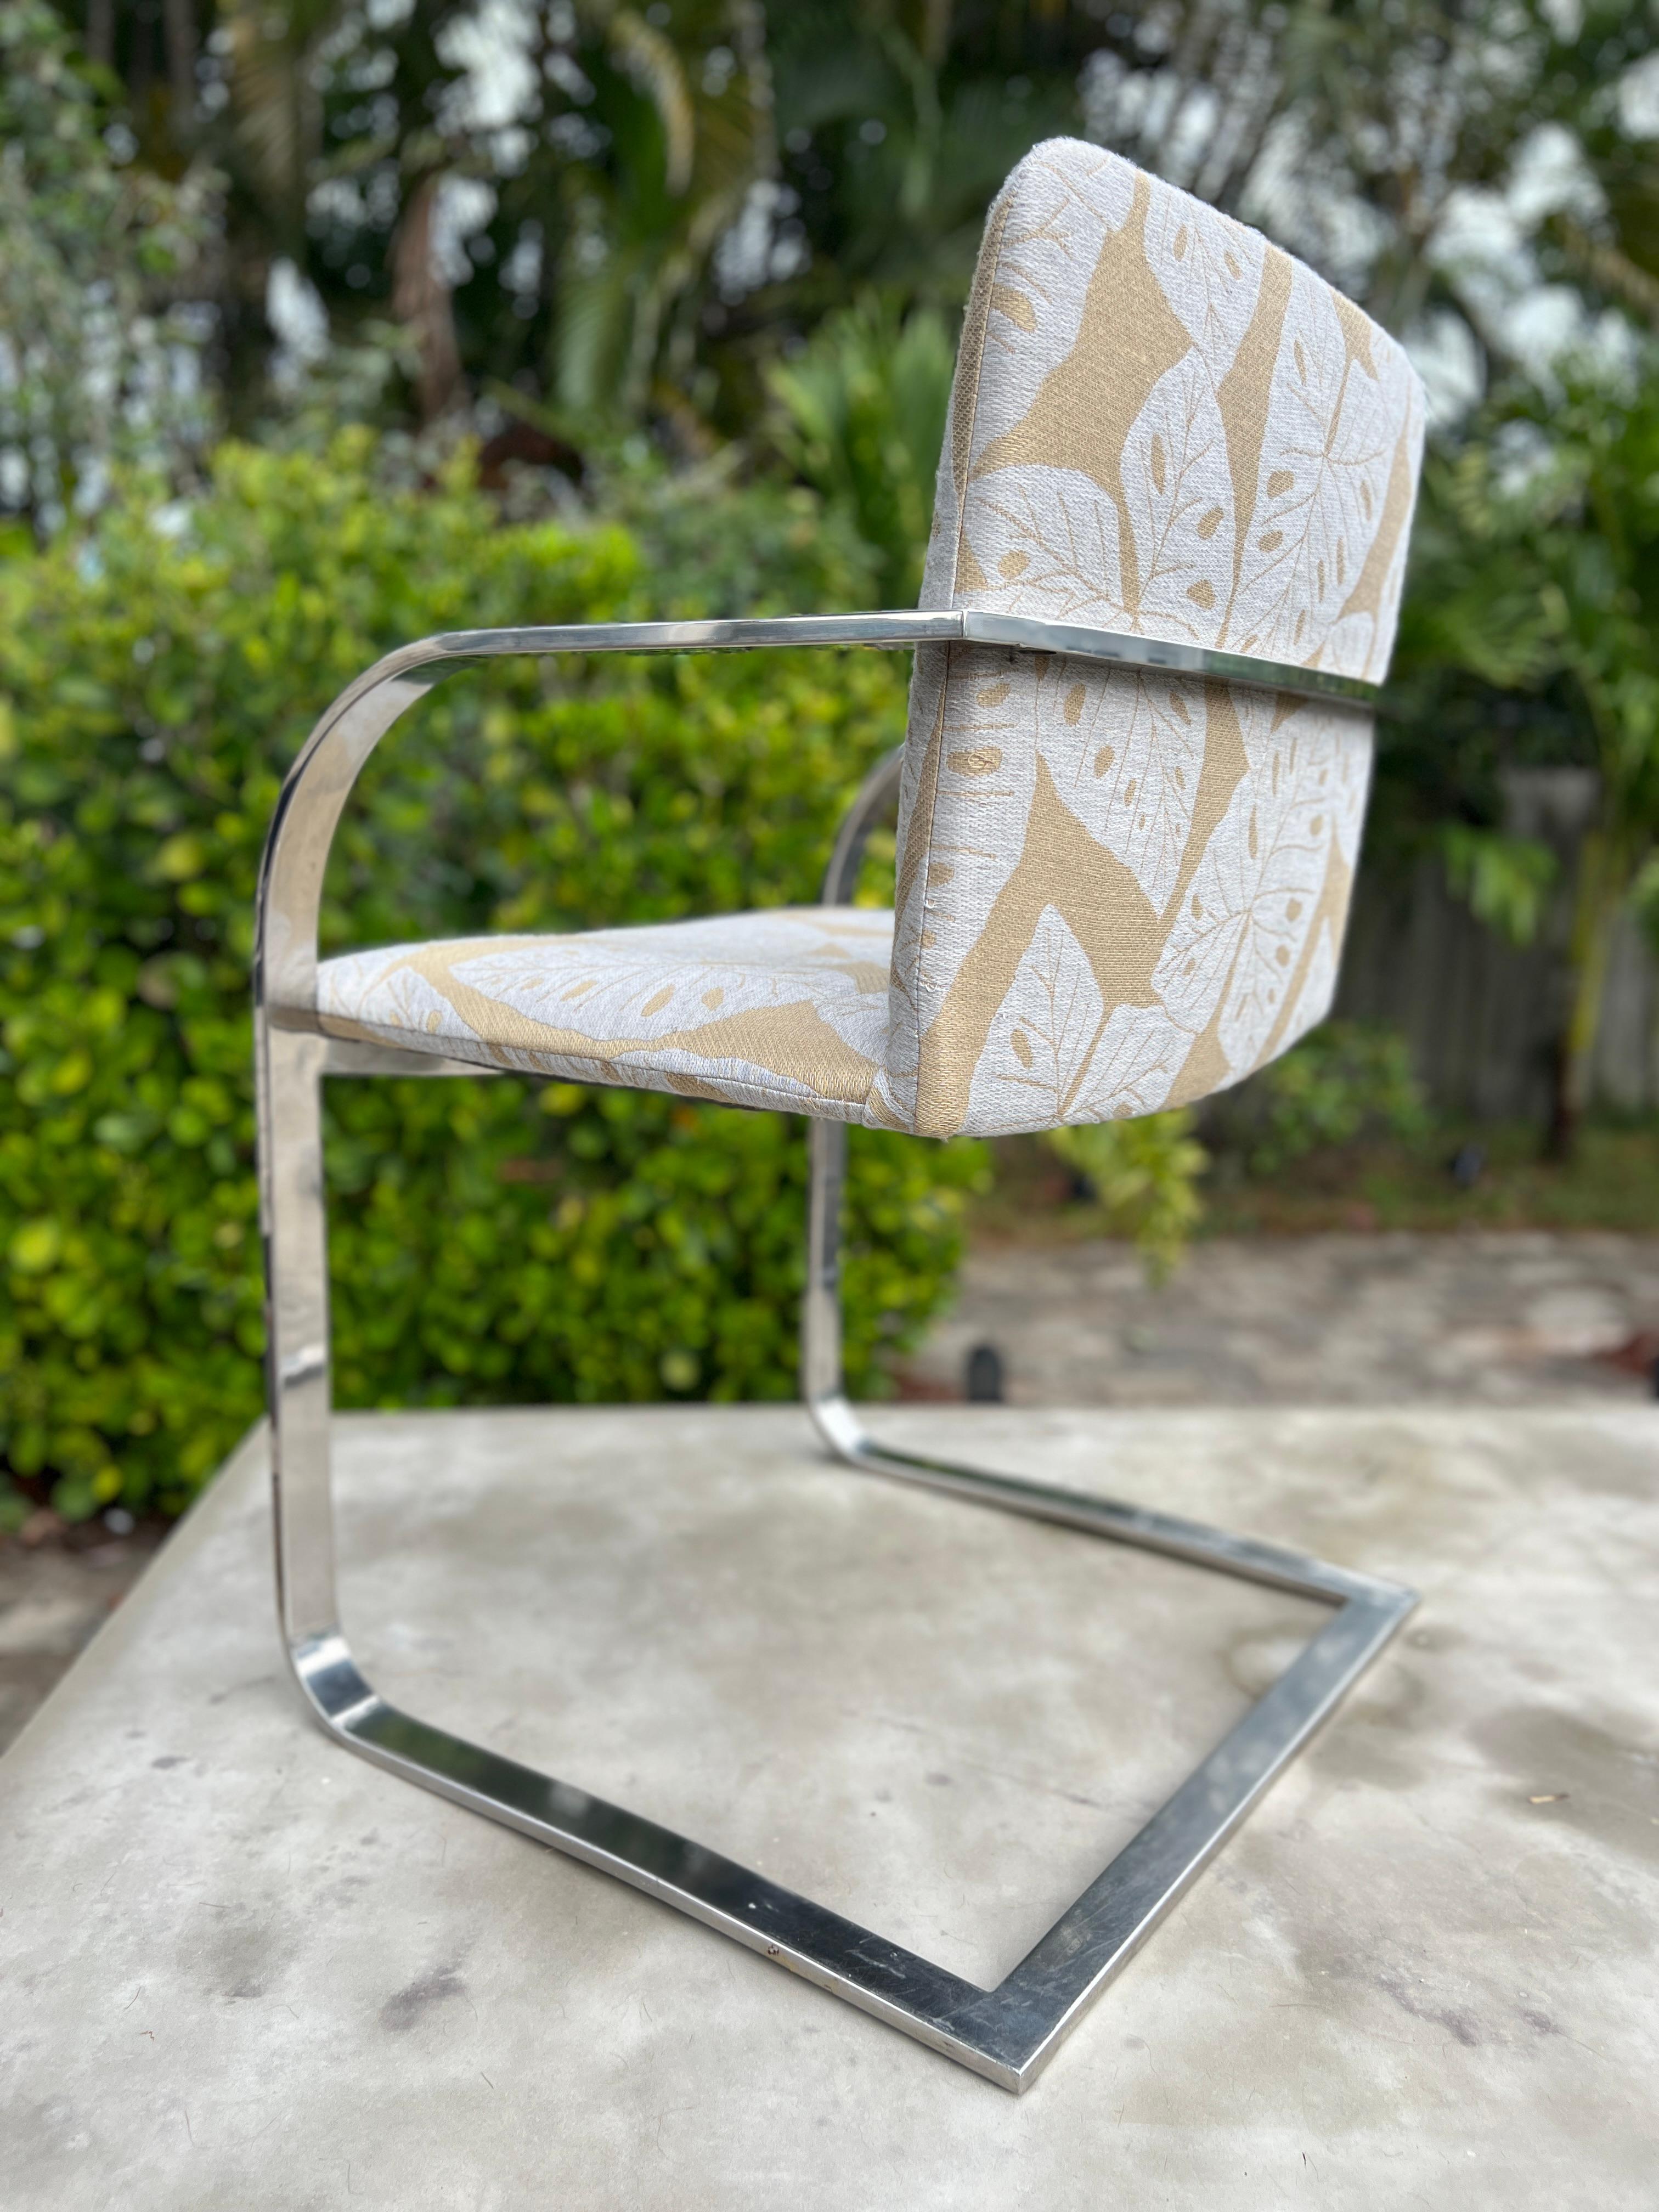 Late 20th Century Chrome Desk Chair by Brueton in Woven Tropical Leaves, c. 1970's For Sale